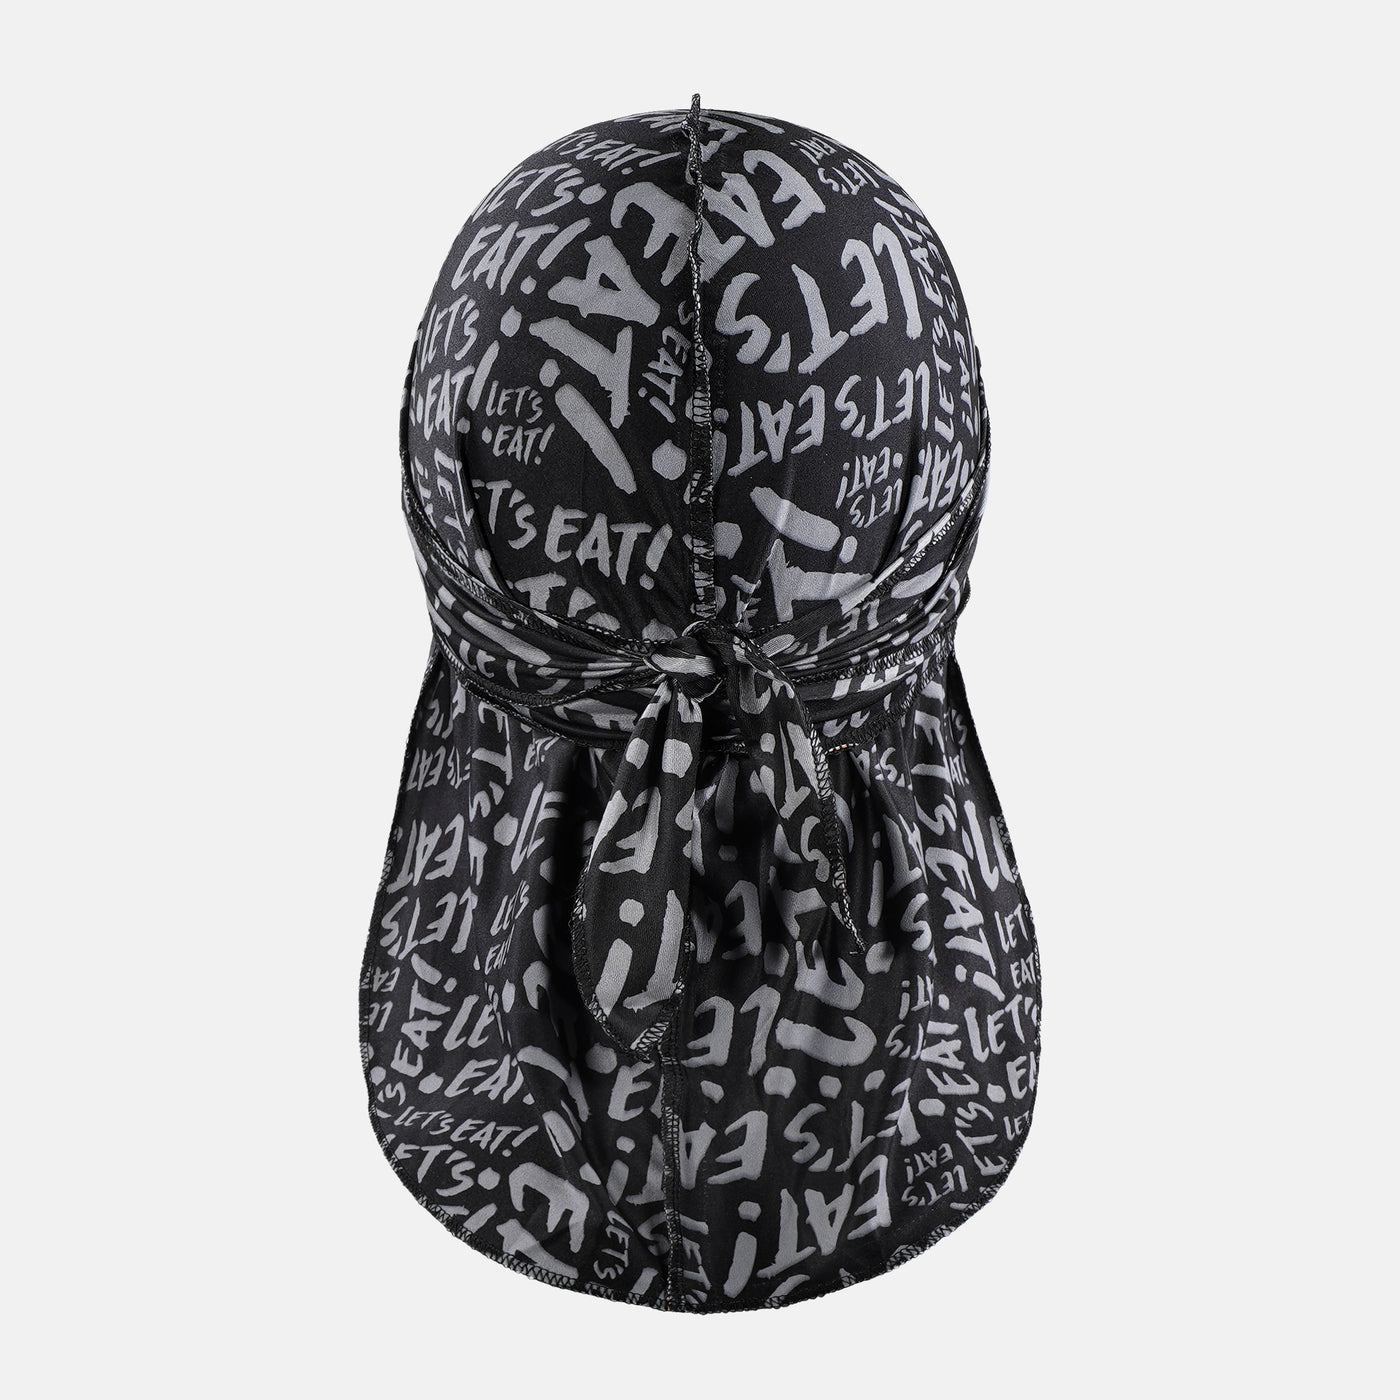 Let's Eat Pattern Tactical Sports Durag